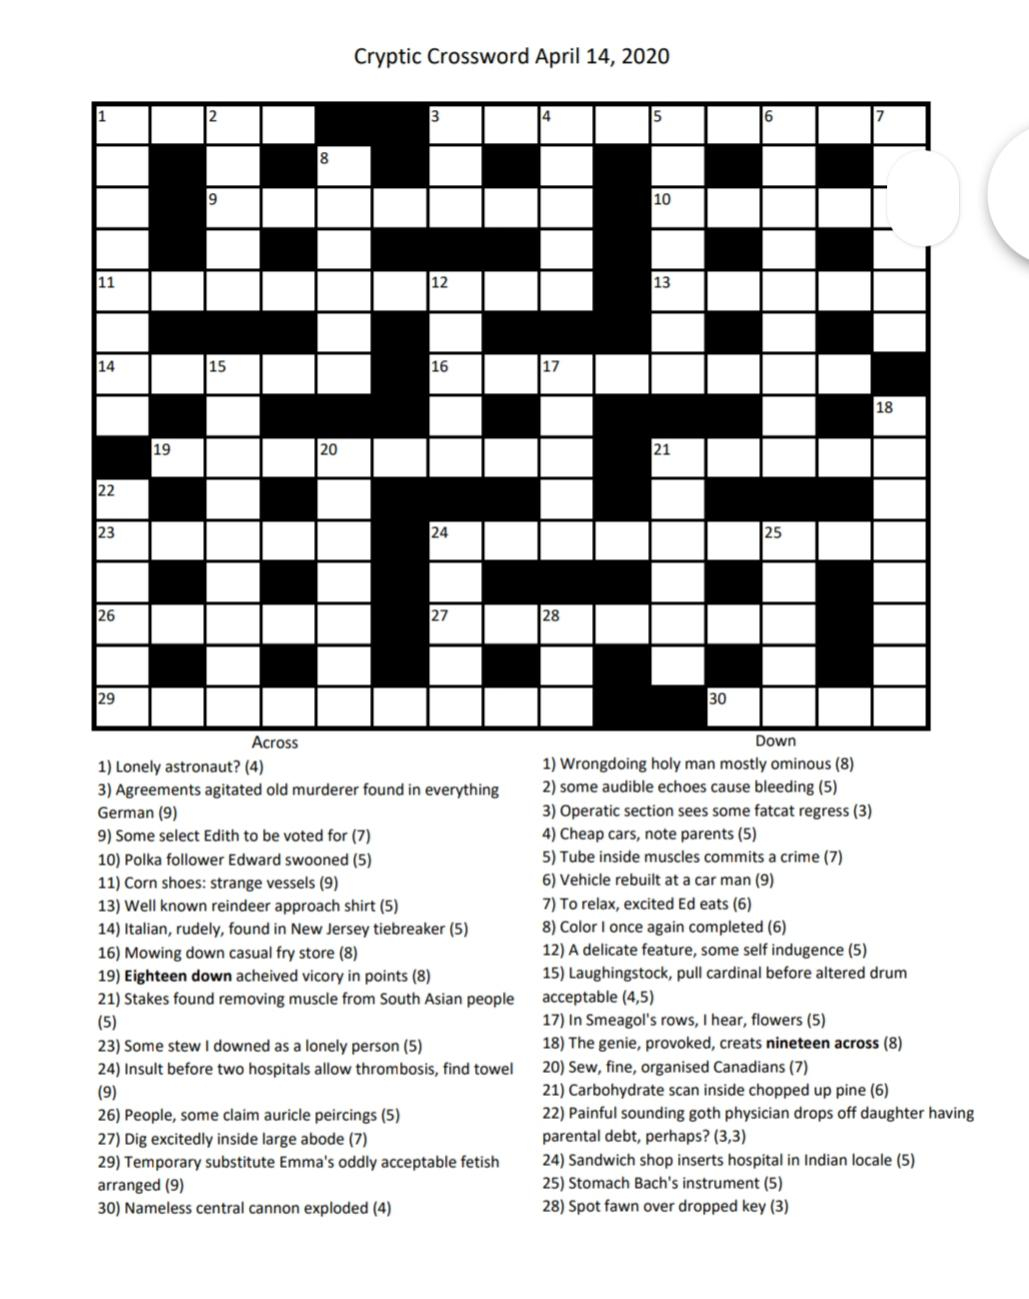 55 Cryptic Crossword Examples Daily Crossword Clue - Easy Cryptic Crossword Archive